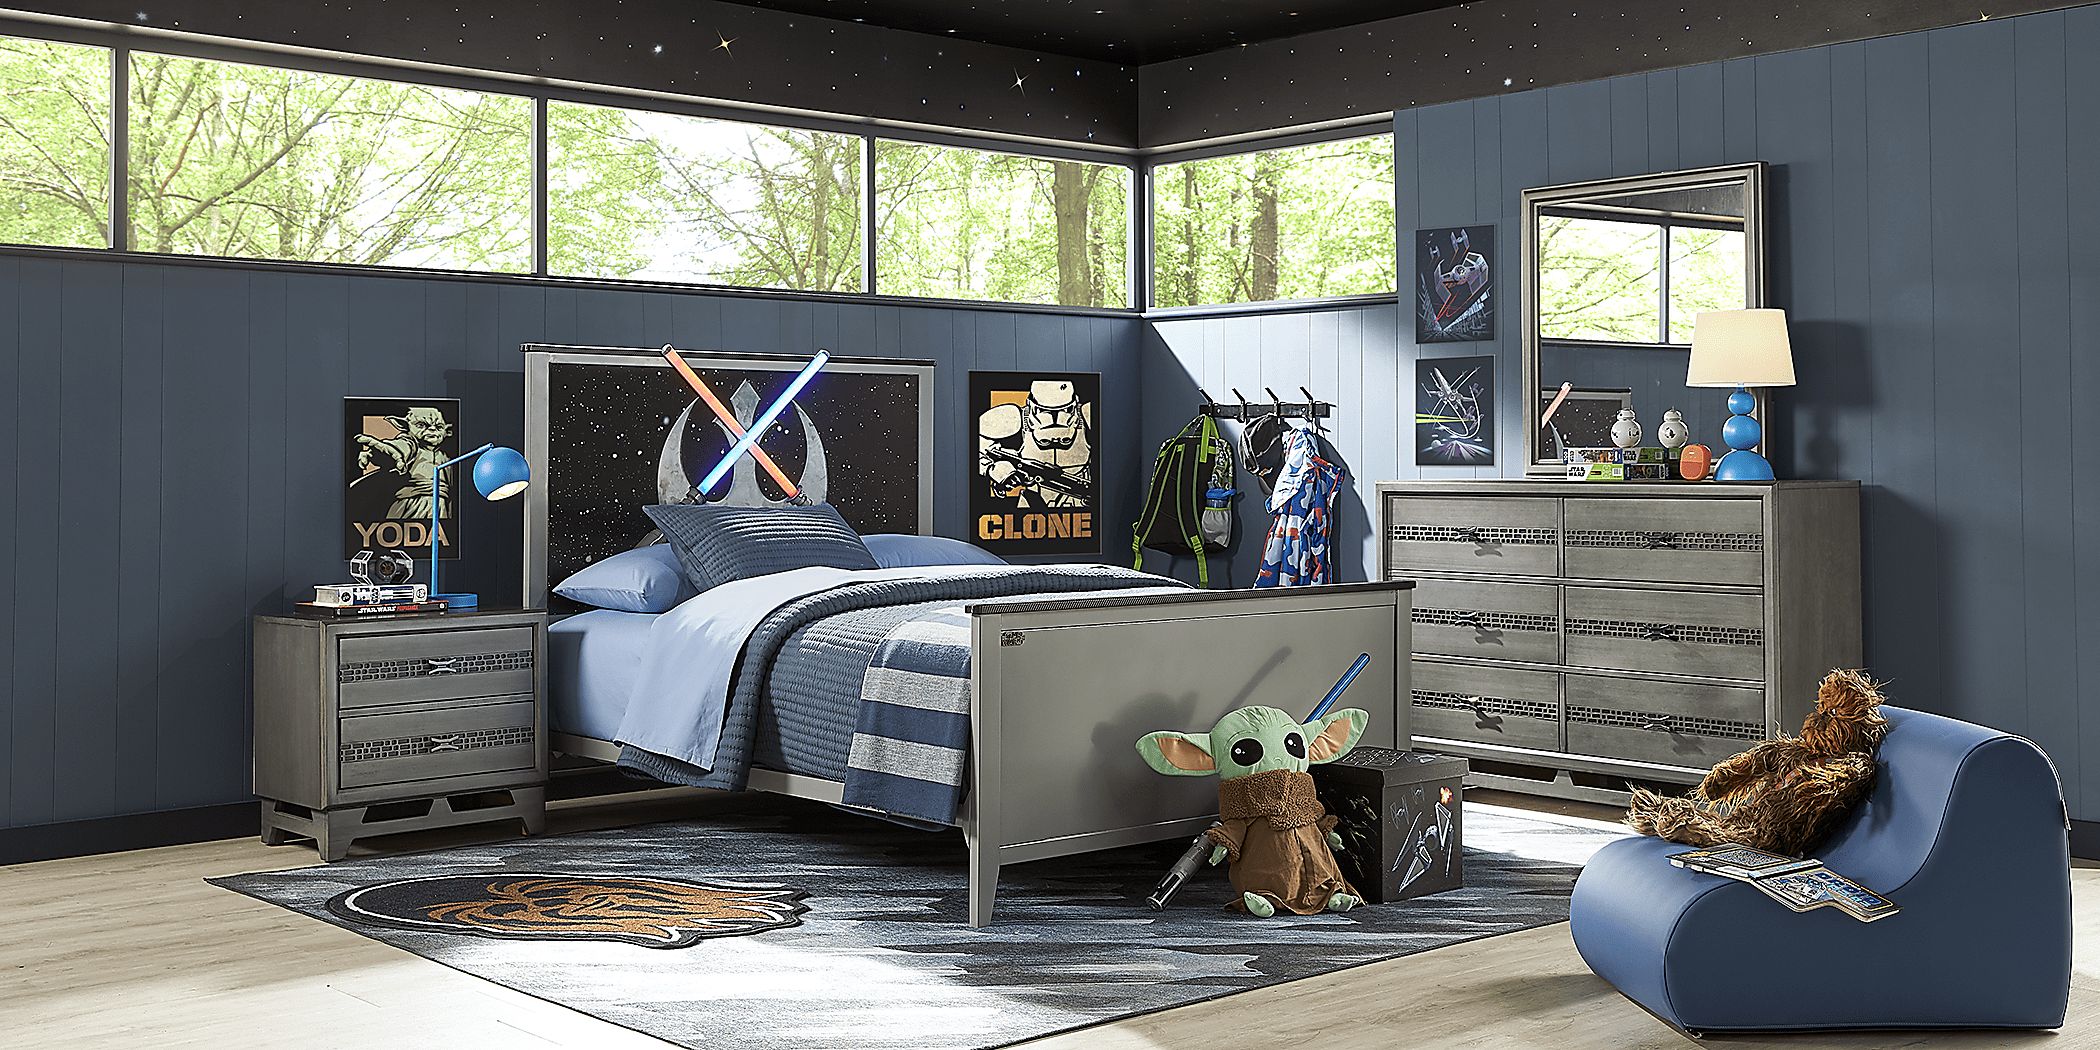 Jay Franco Star Wars Classic Lightsaber Twin Bed in A Bag, 